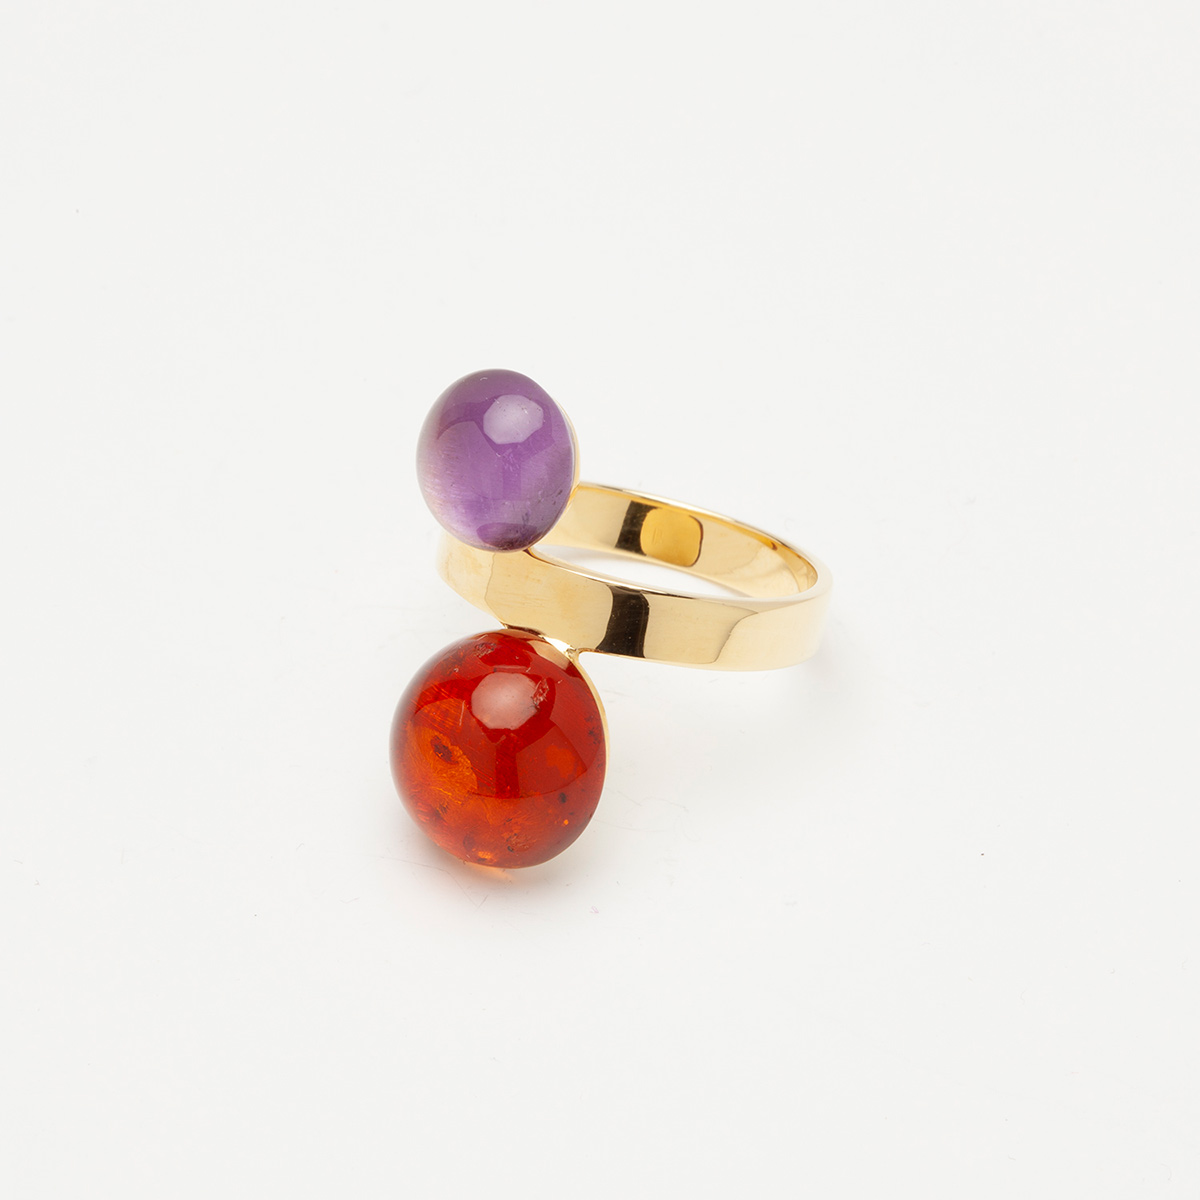 Kea handmade 18k gold plated 925 silver, amber and amethyst ring 1 designed by Belen Bajo